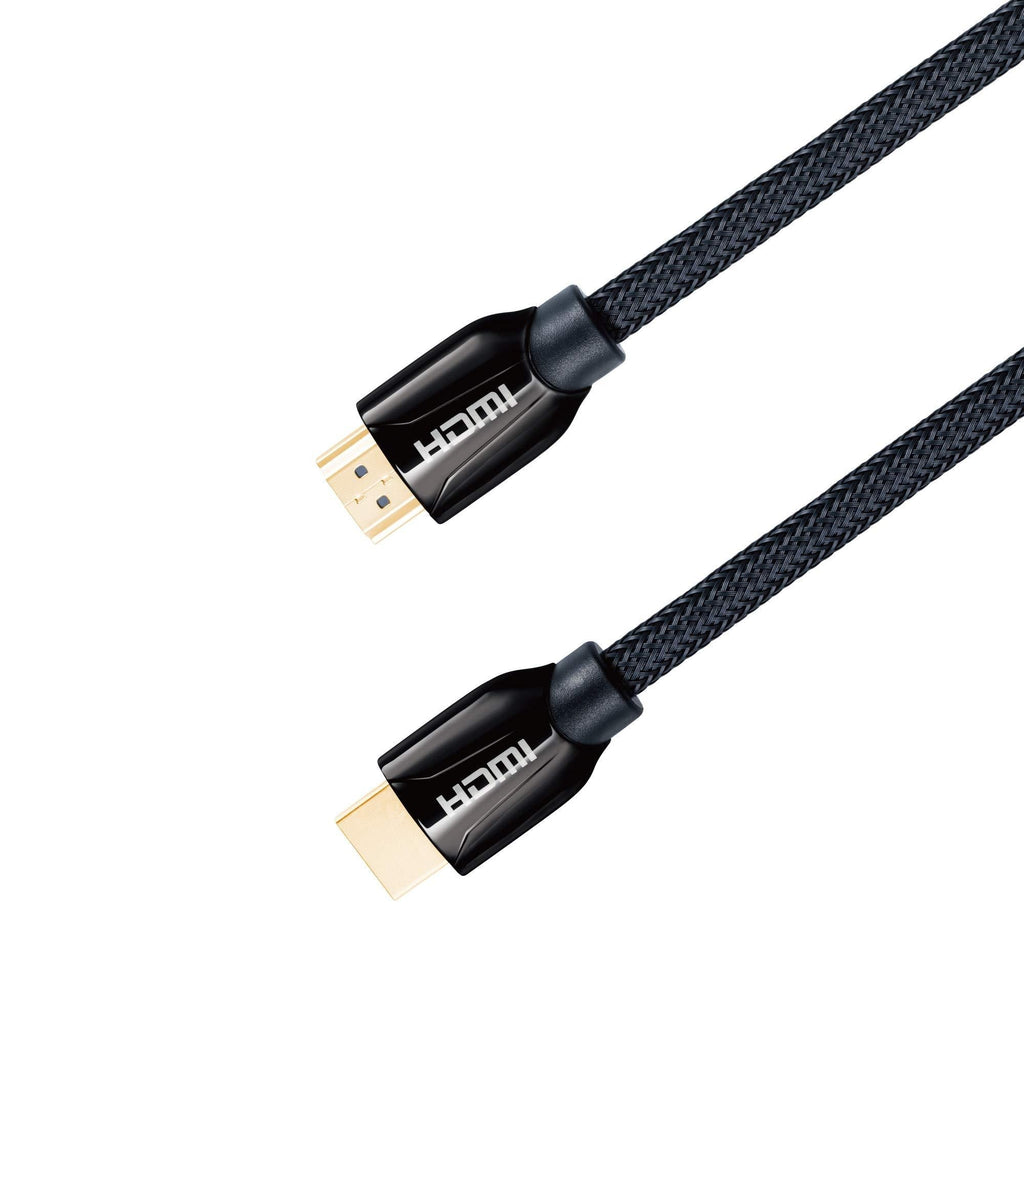 JAVEX Pure Copper HDMI Cable, Metal Connector, Nylon Braided Protection, 4K@60Hz 18Gpbs, 3M(10FT) 10FT Braided